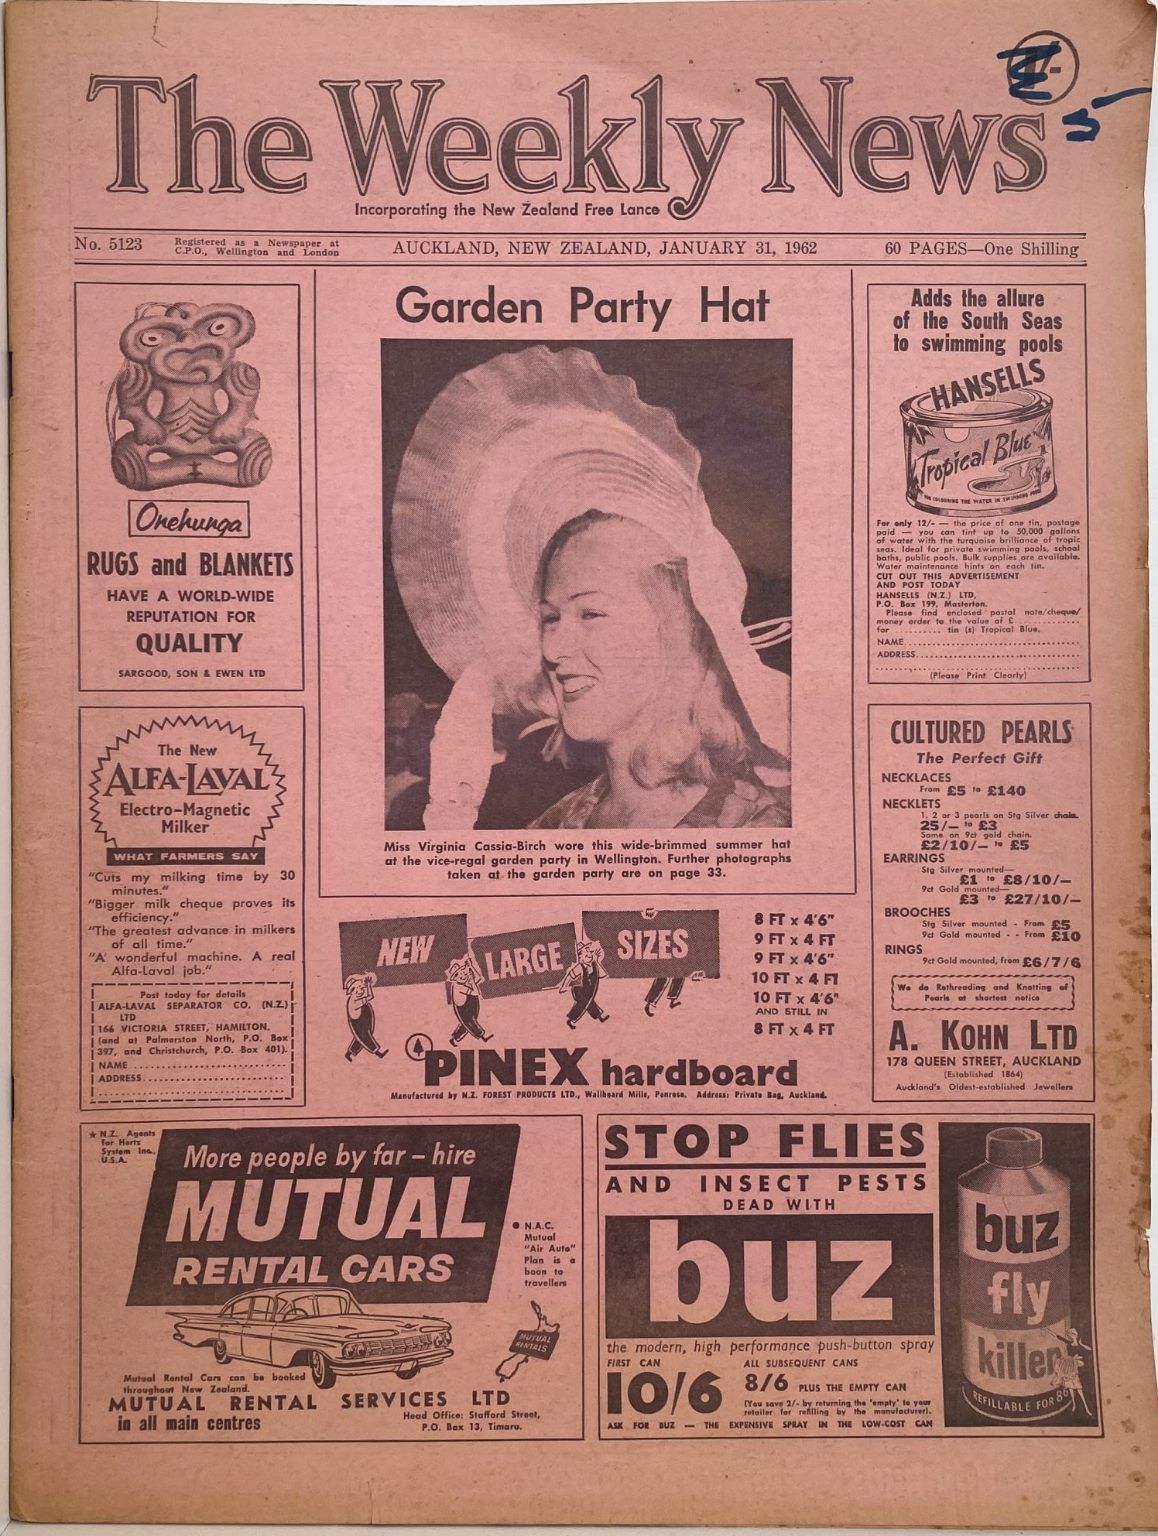 OLD NEWSPAPER: The Weekly News, 31 January 1962